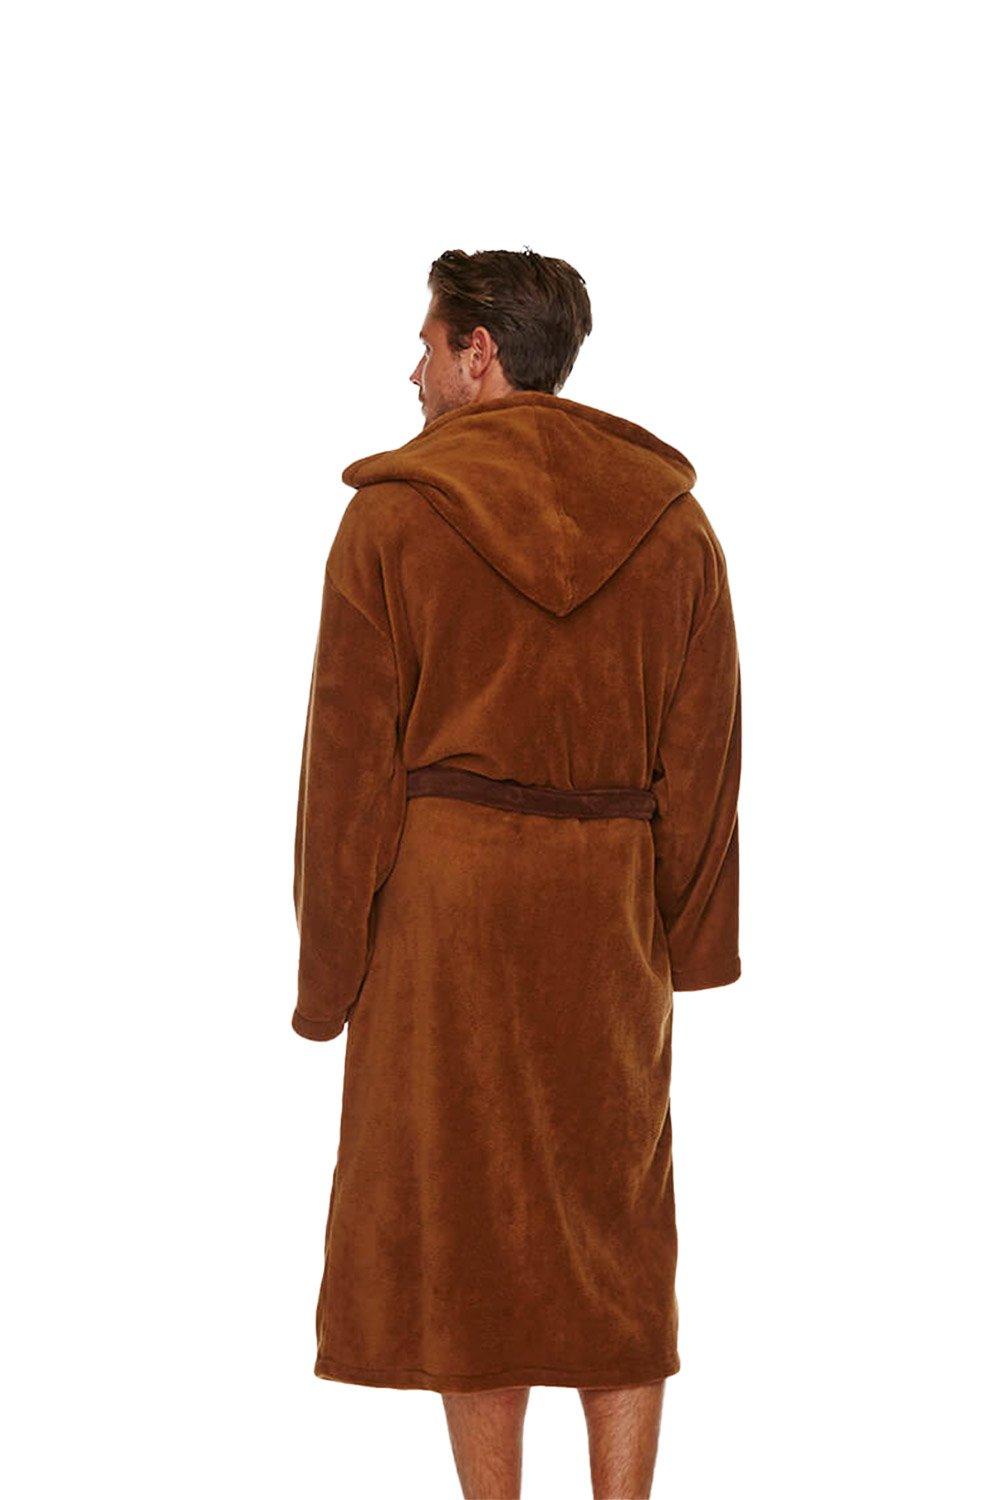 Ukonic Star Wars Chewbacca Hooded Bathrobe for Adults | One Size Fits Most  at Amazon Men's Clothing store